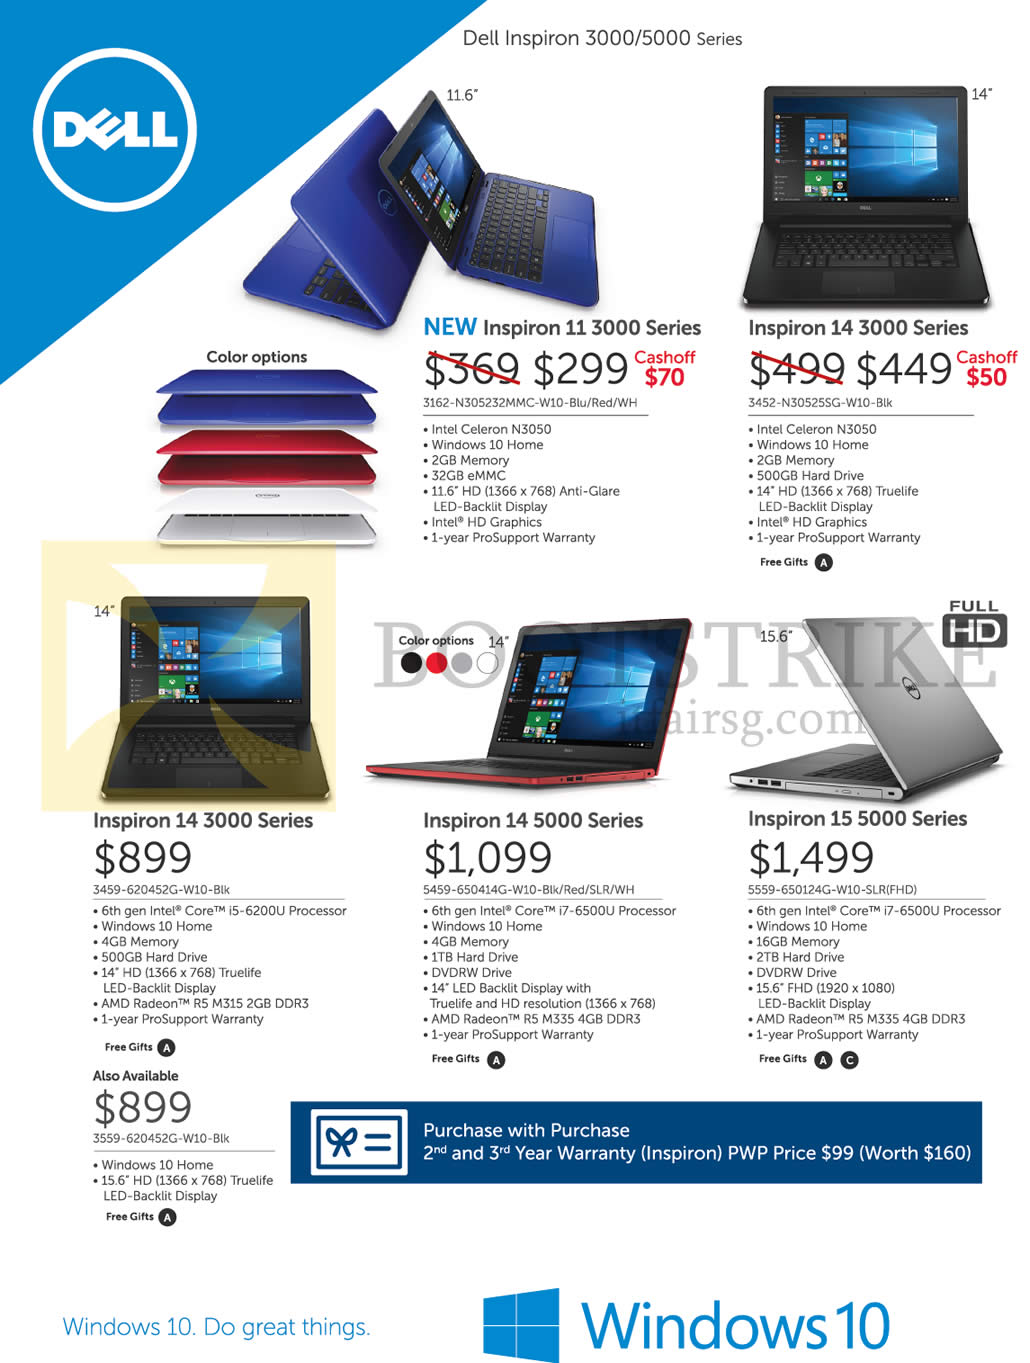 IT SHOW 2016 price list image brochure of Dell Notebooks Inspiron 11 3000, 14 3000, 14 5000, 15 5000 Series